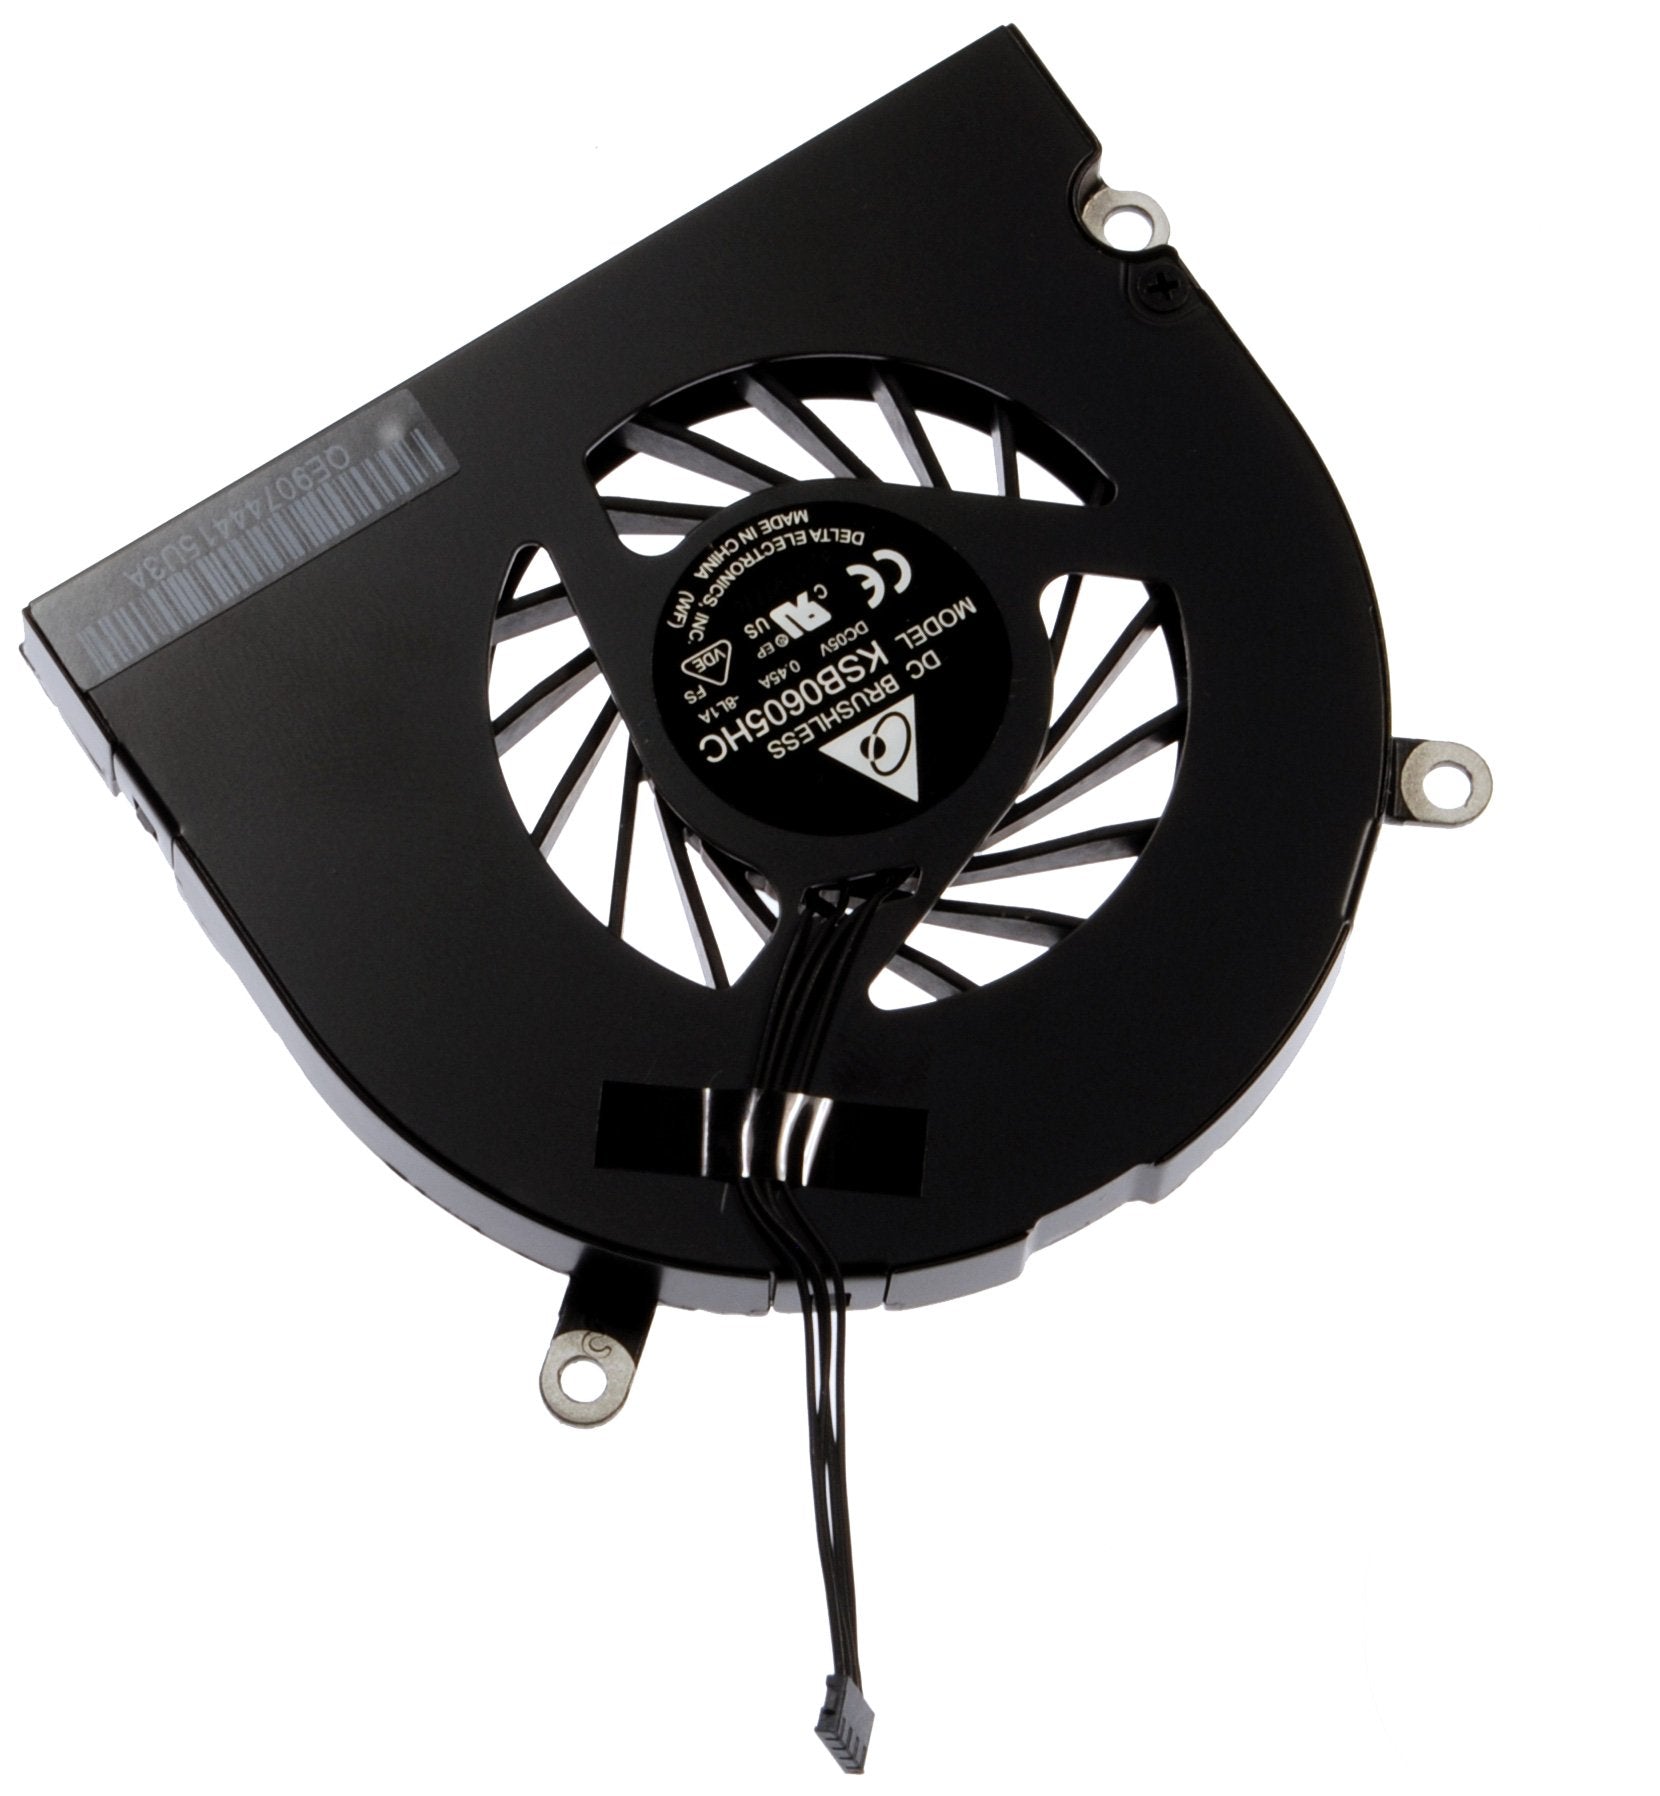 MacBook Pro 15" Unibody (2.53 GHz Mid 2009) or 17" Unibody (Early/Mid 2009) Right Fan